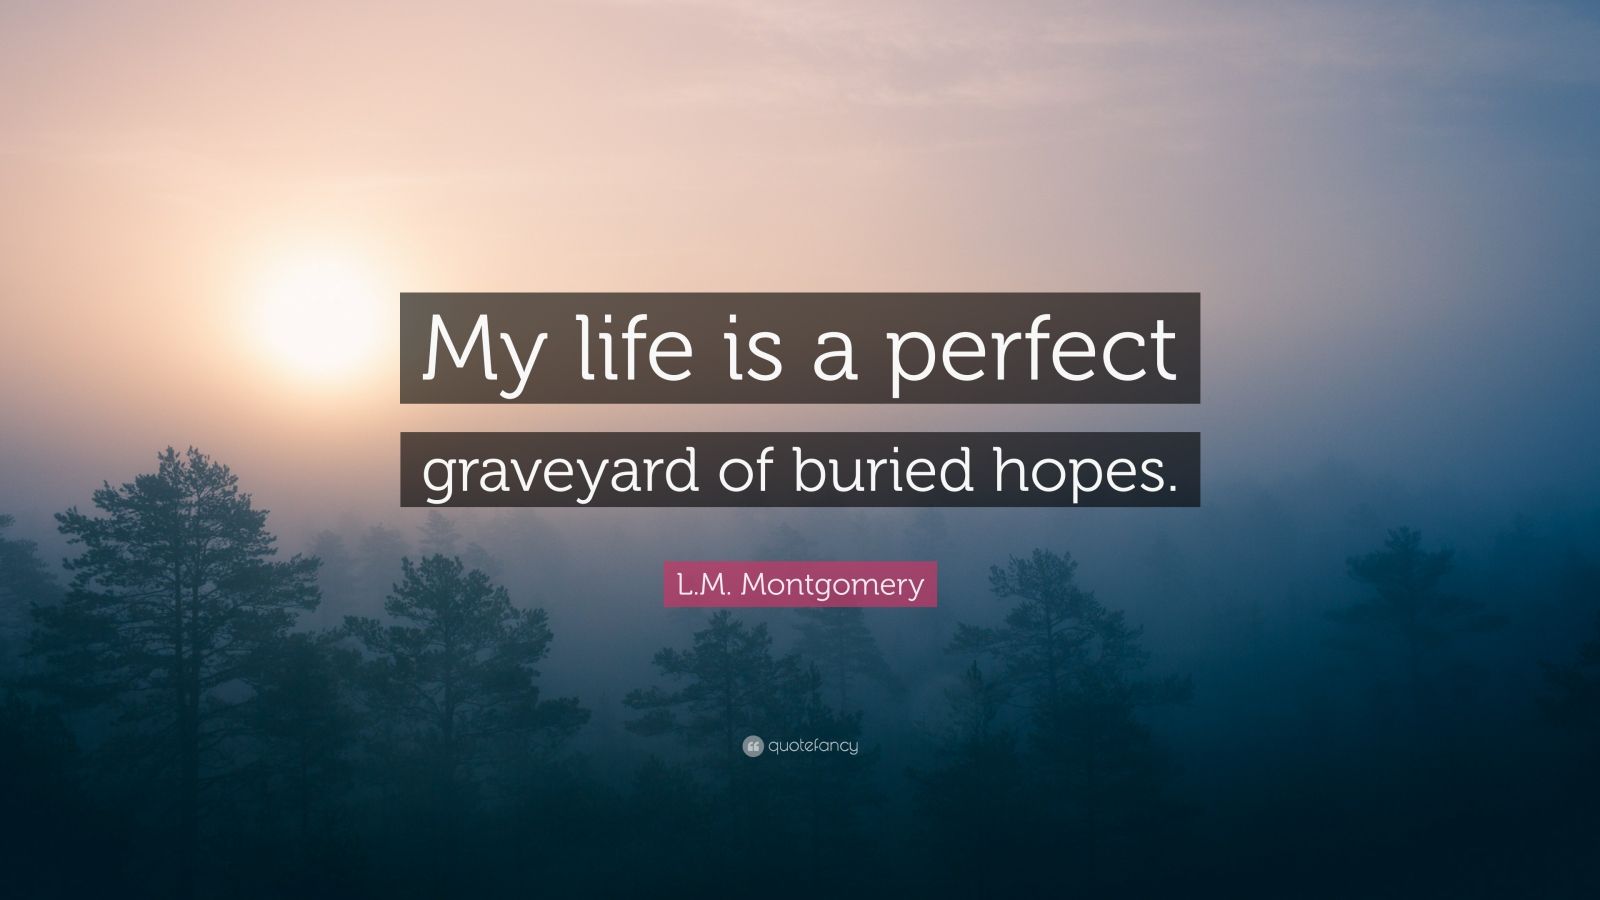 Graveyard Quote / My life is a perfect graveyard of buried hopes. L.M